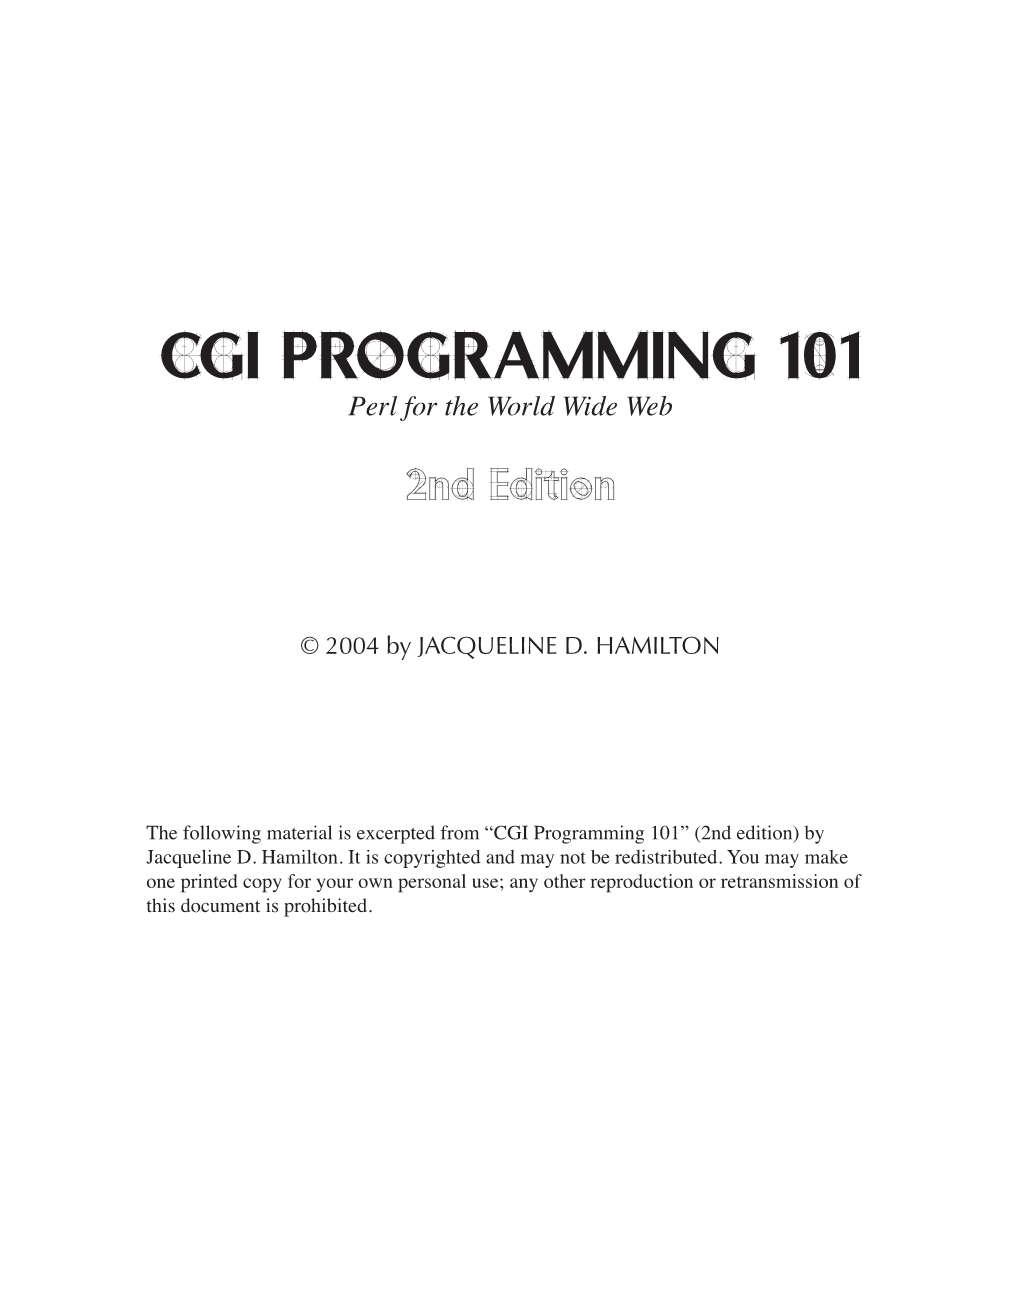 CGI PROGRAMMING 101 Perl for the World Wide Web 2Nd Edition